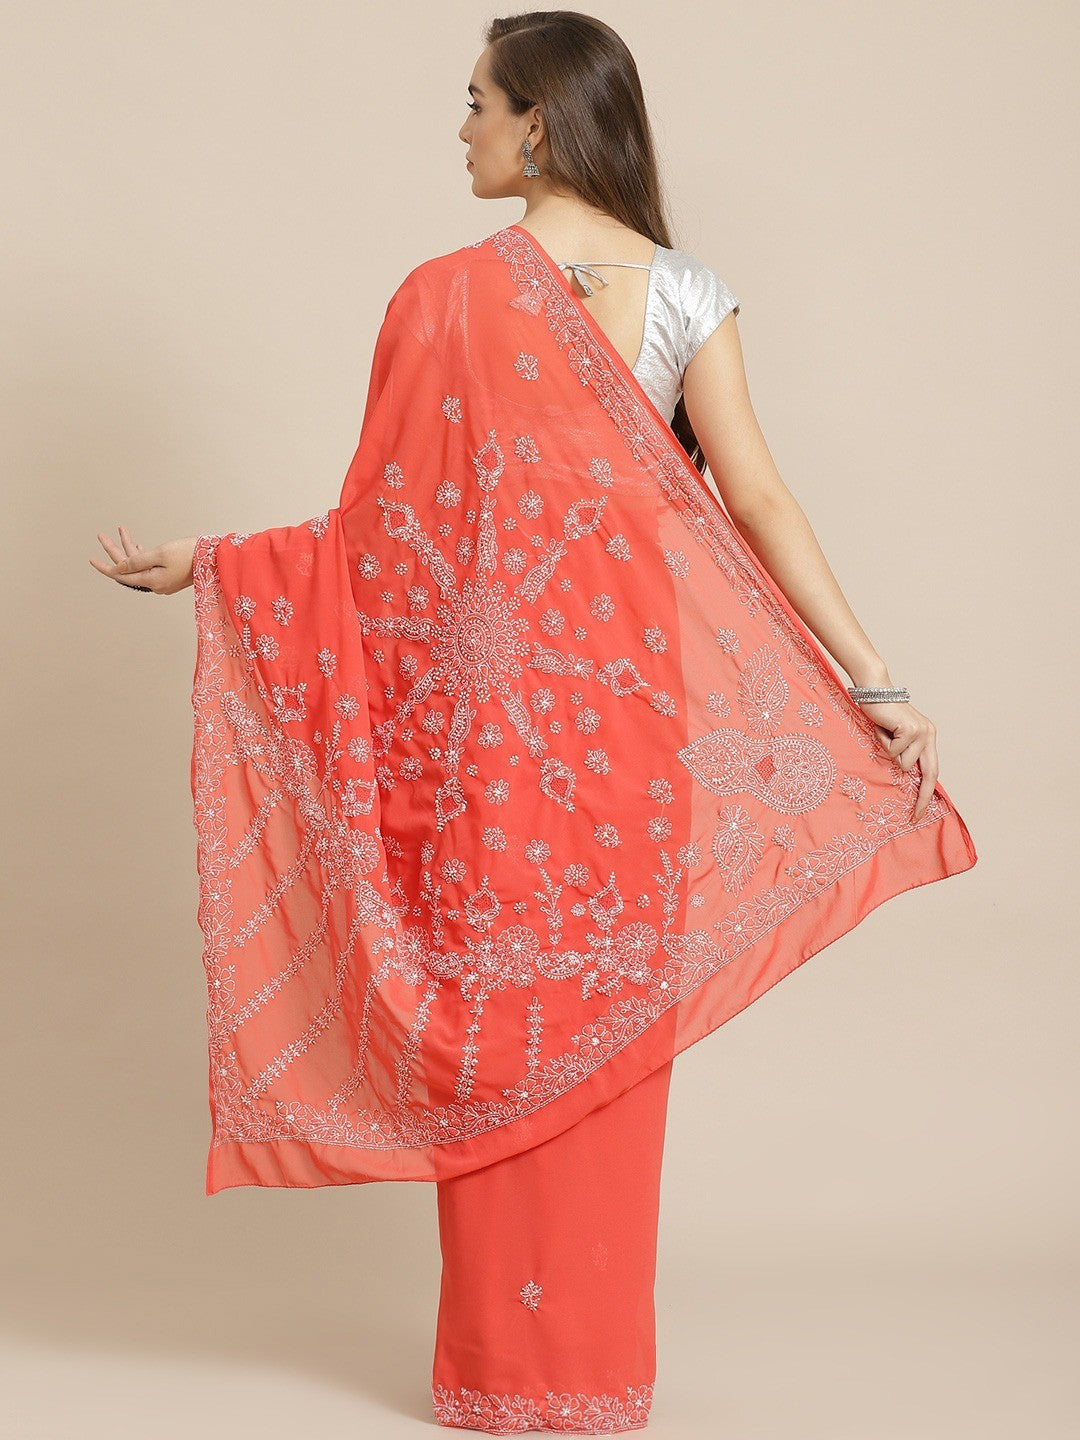 Brick-Red-Lucknow-Chikan-Saree-With-Blouse